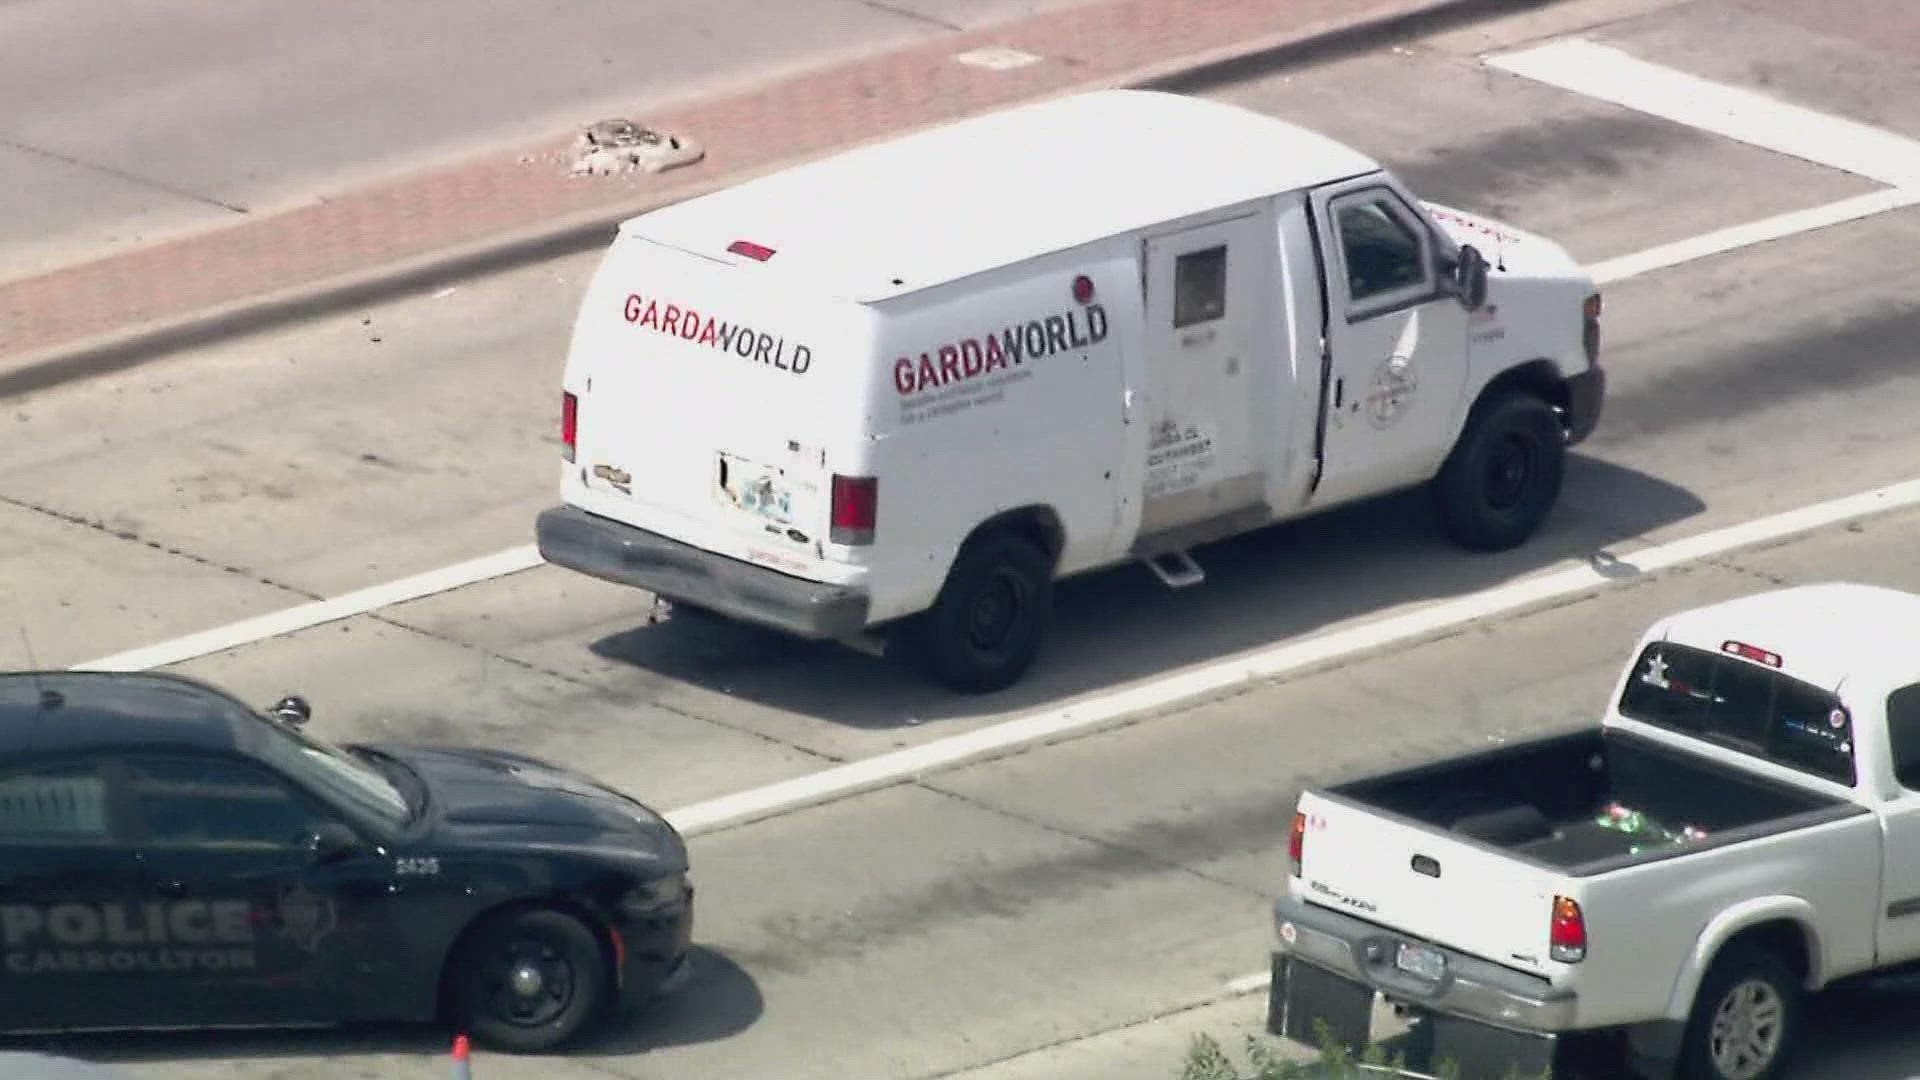 Police say the armored truck employee was found suffering from a gunshot wound to the arm, but the employee's injuries are not life threatening.